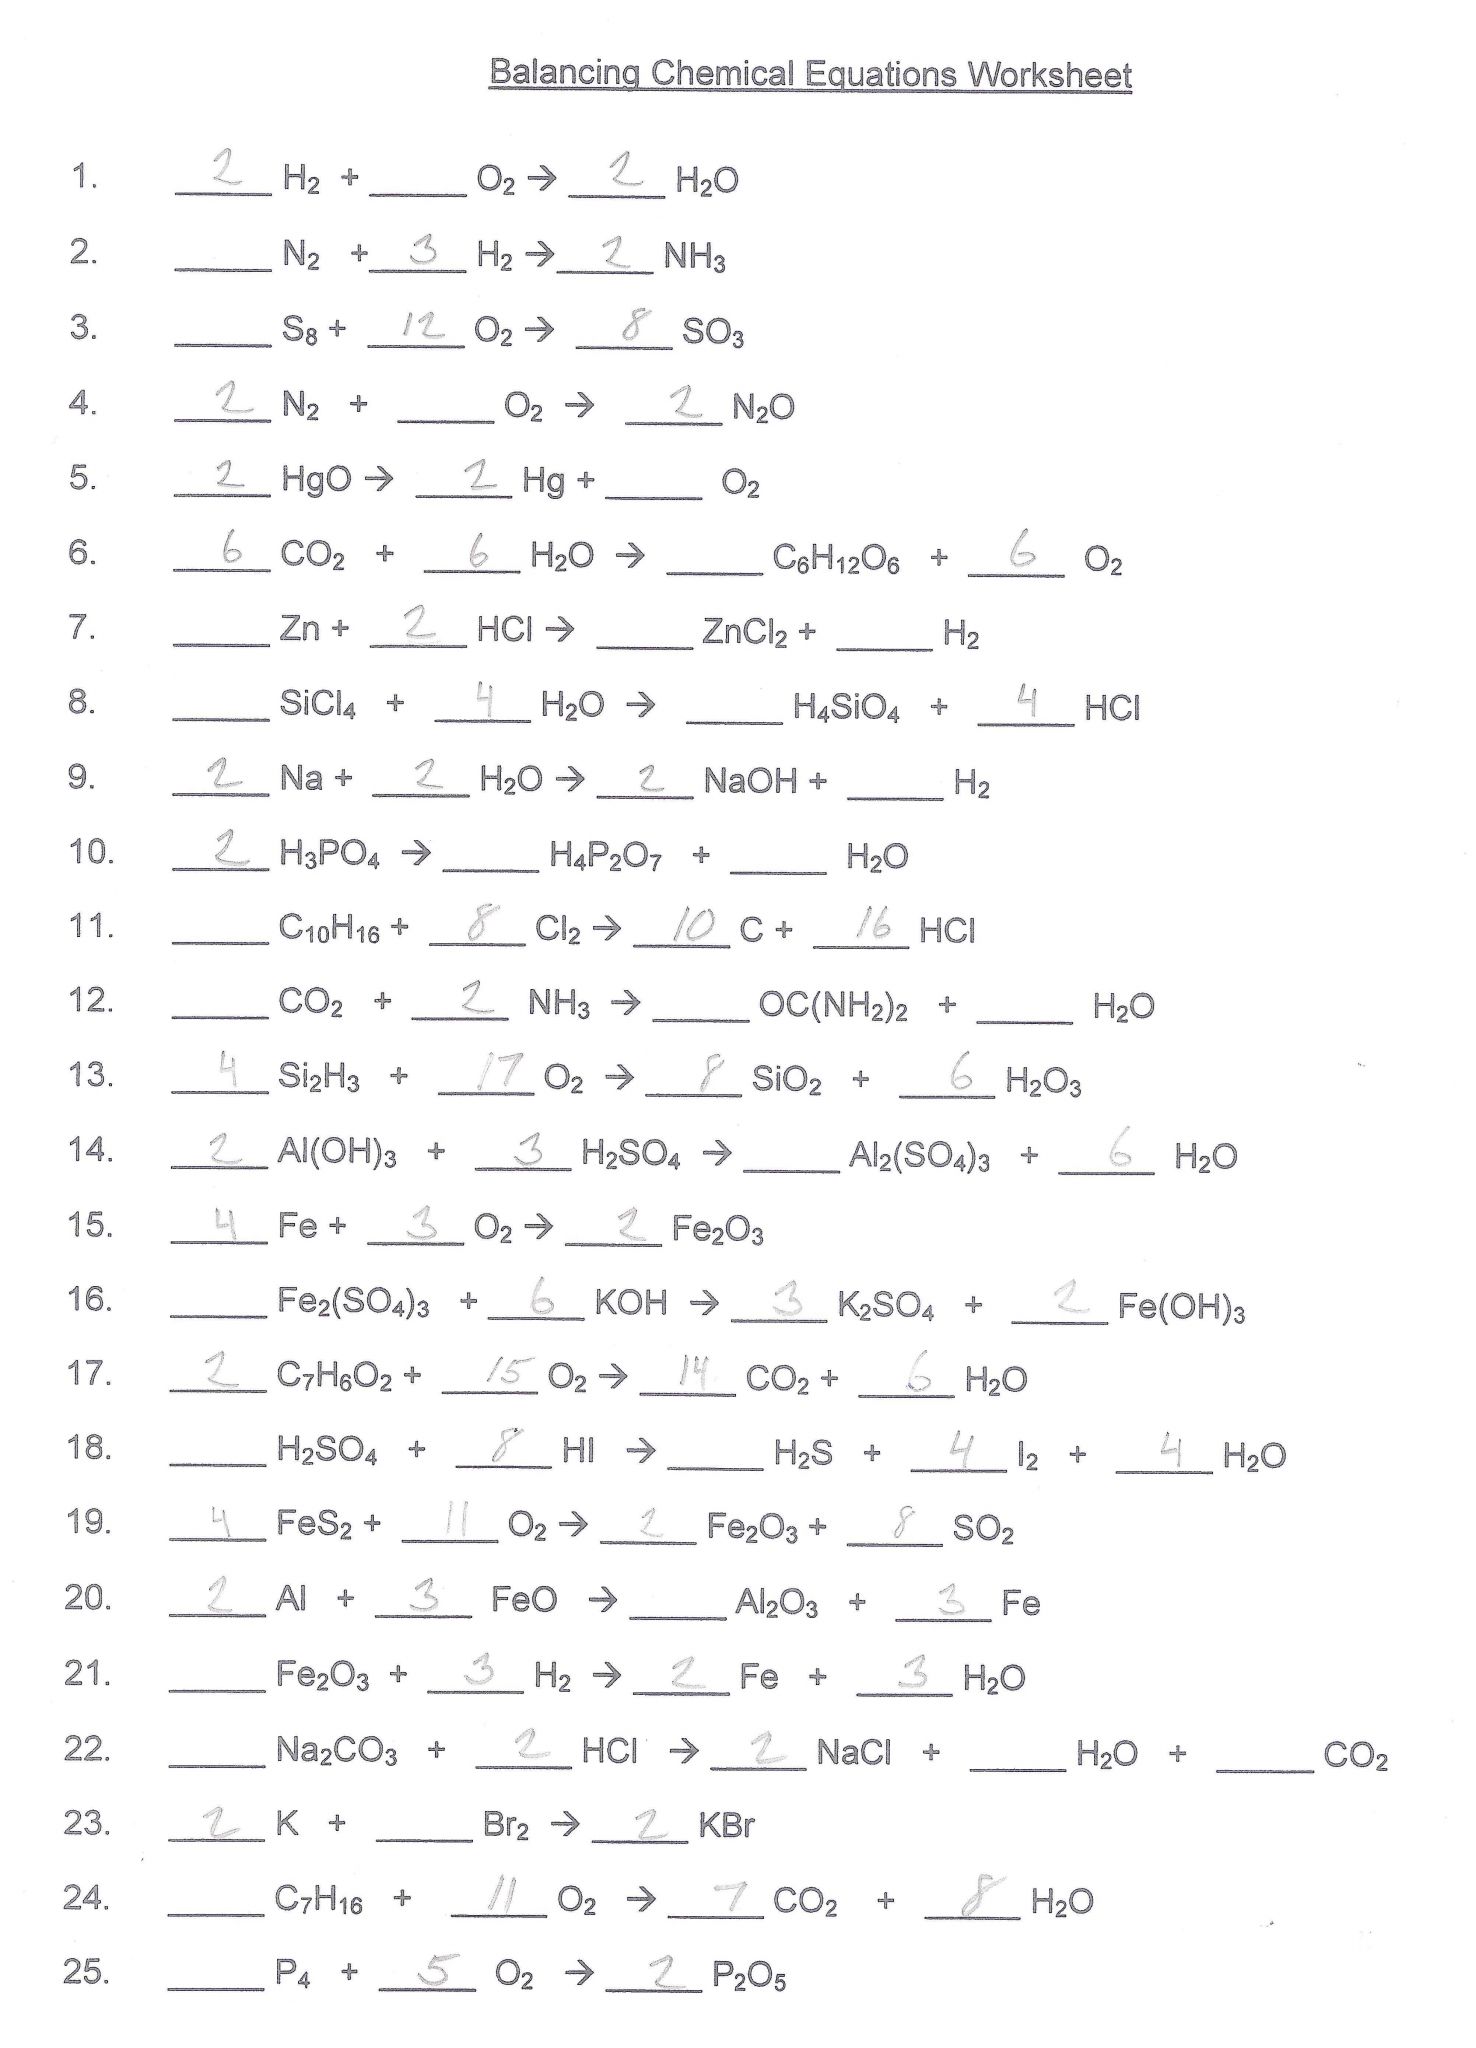 Naming Chemical Compounds Worksheet Along with Balancing Chemical Equations Worksheet Answer Key